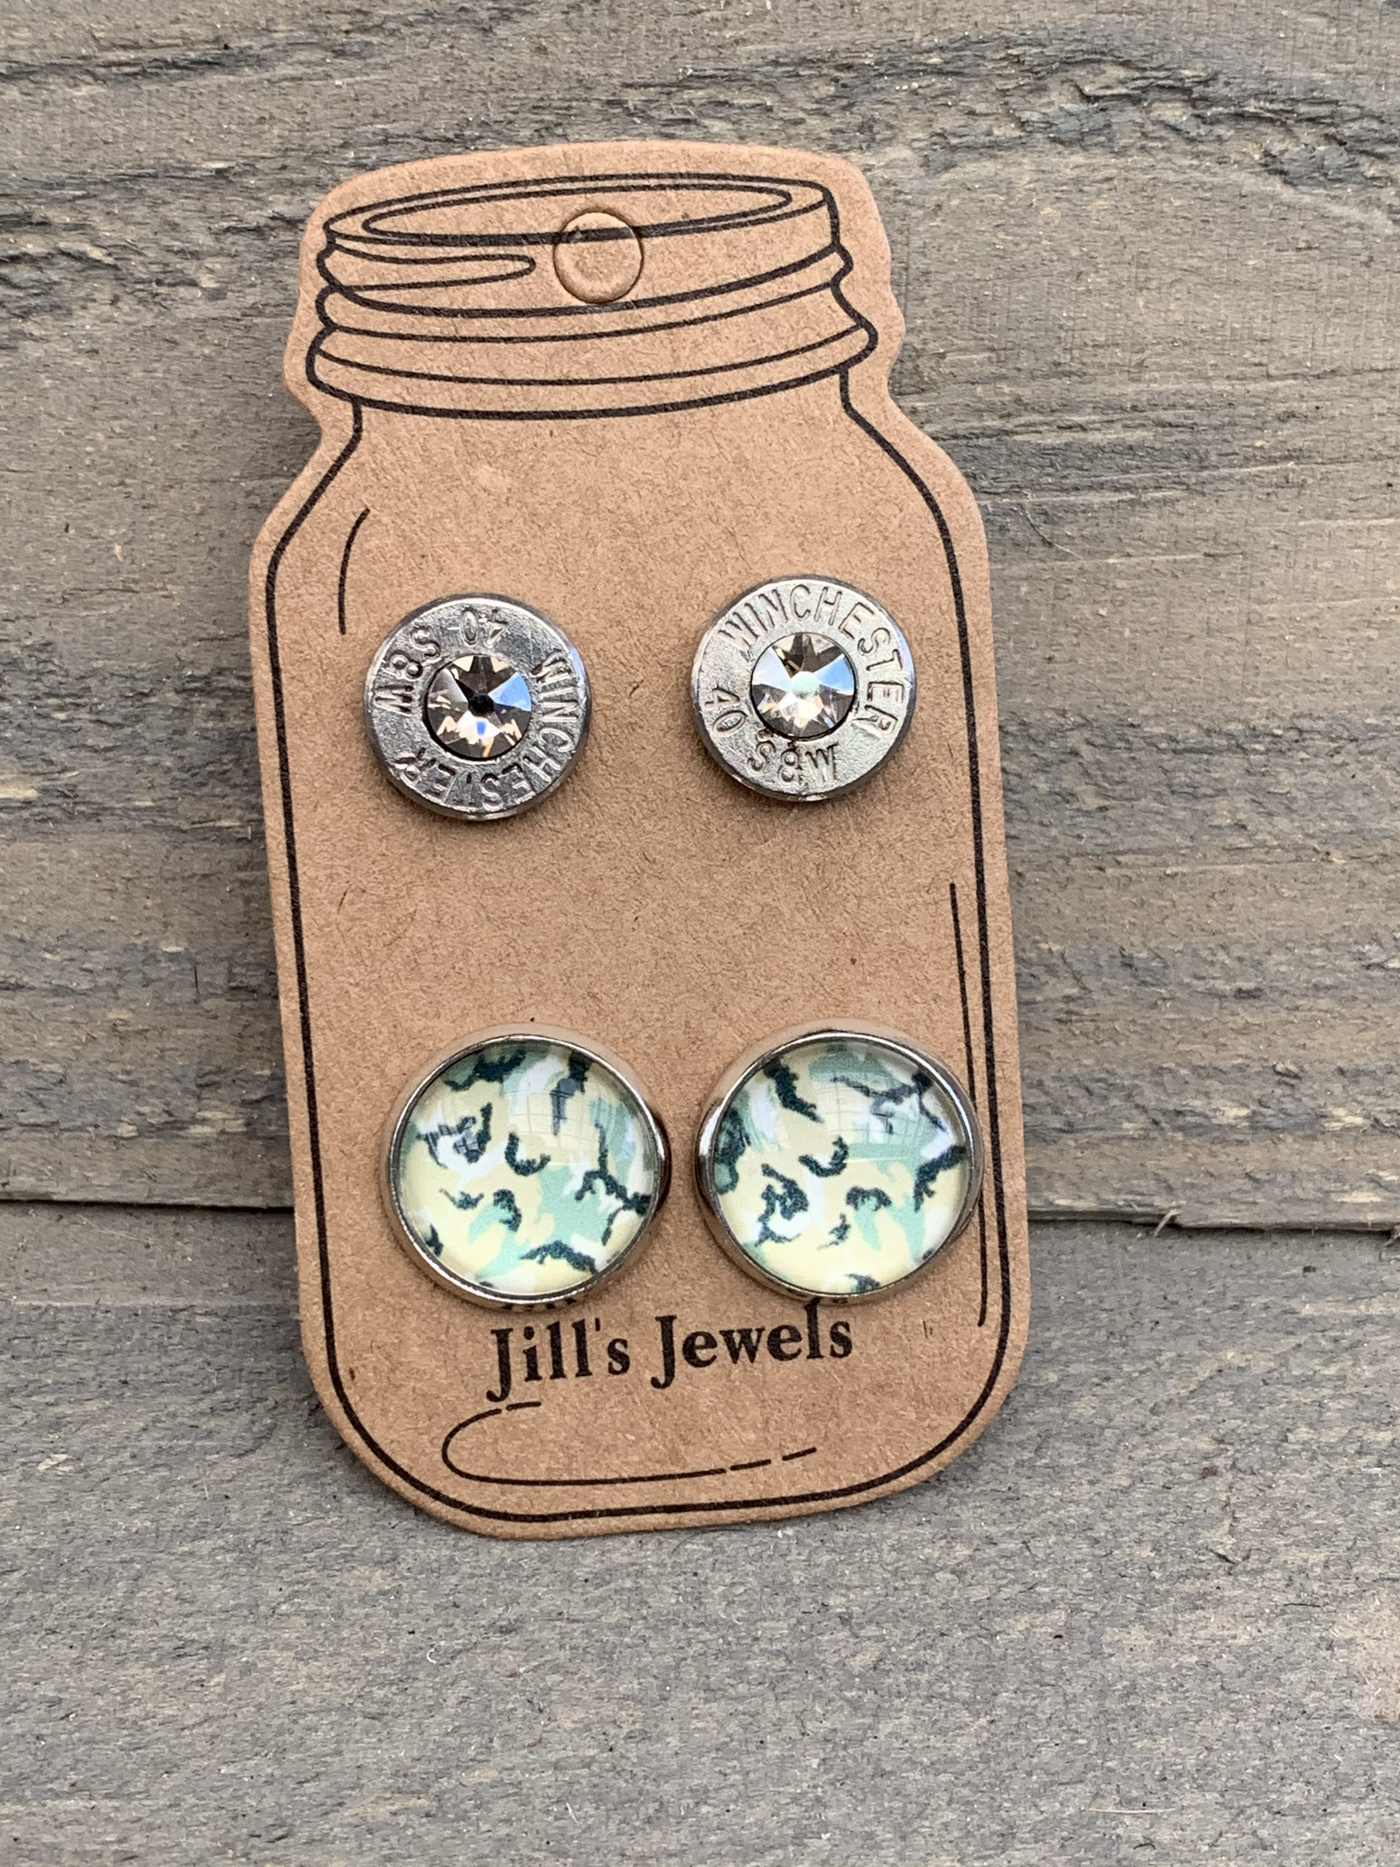 Army Green Camo 40 Caliber bullet earring set - Jill's Jewels | Unique, Handcrafted, Trendy, And Fun Jewelry